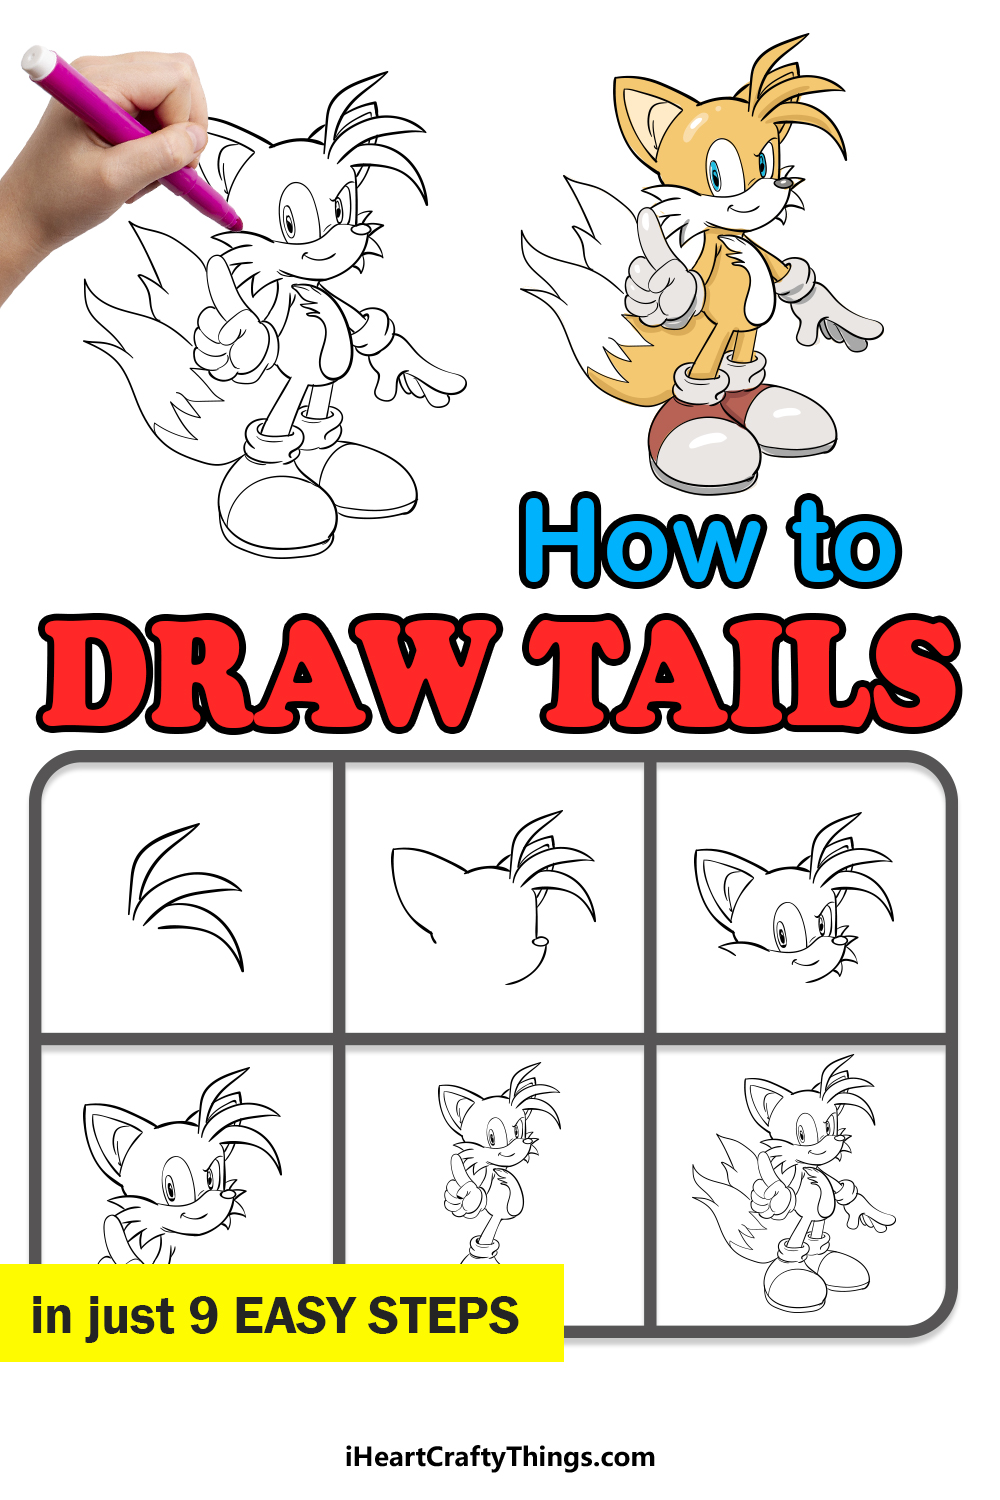 how to draw tails in 9 easy steps